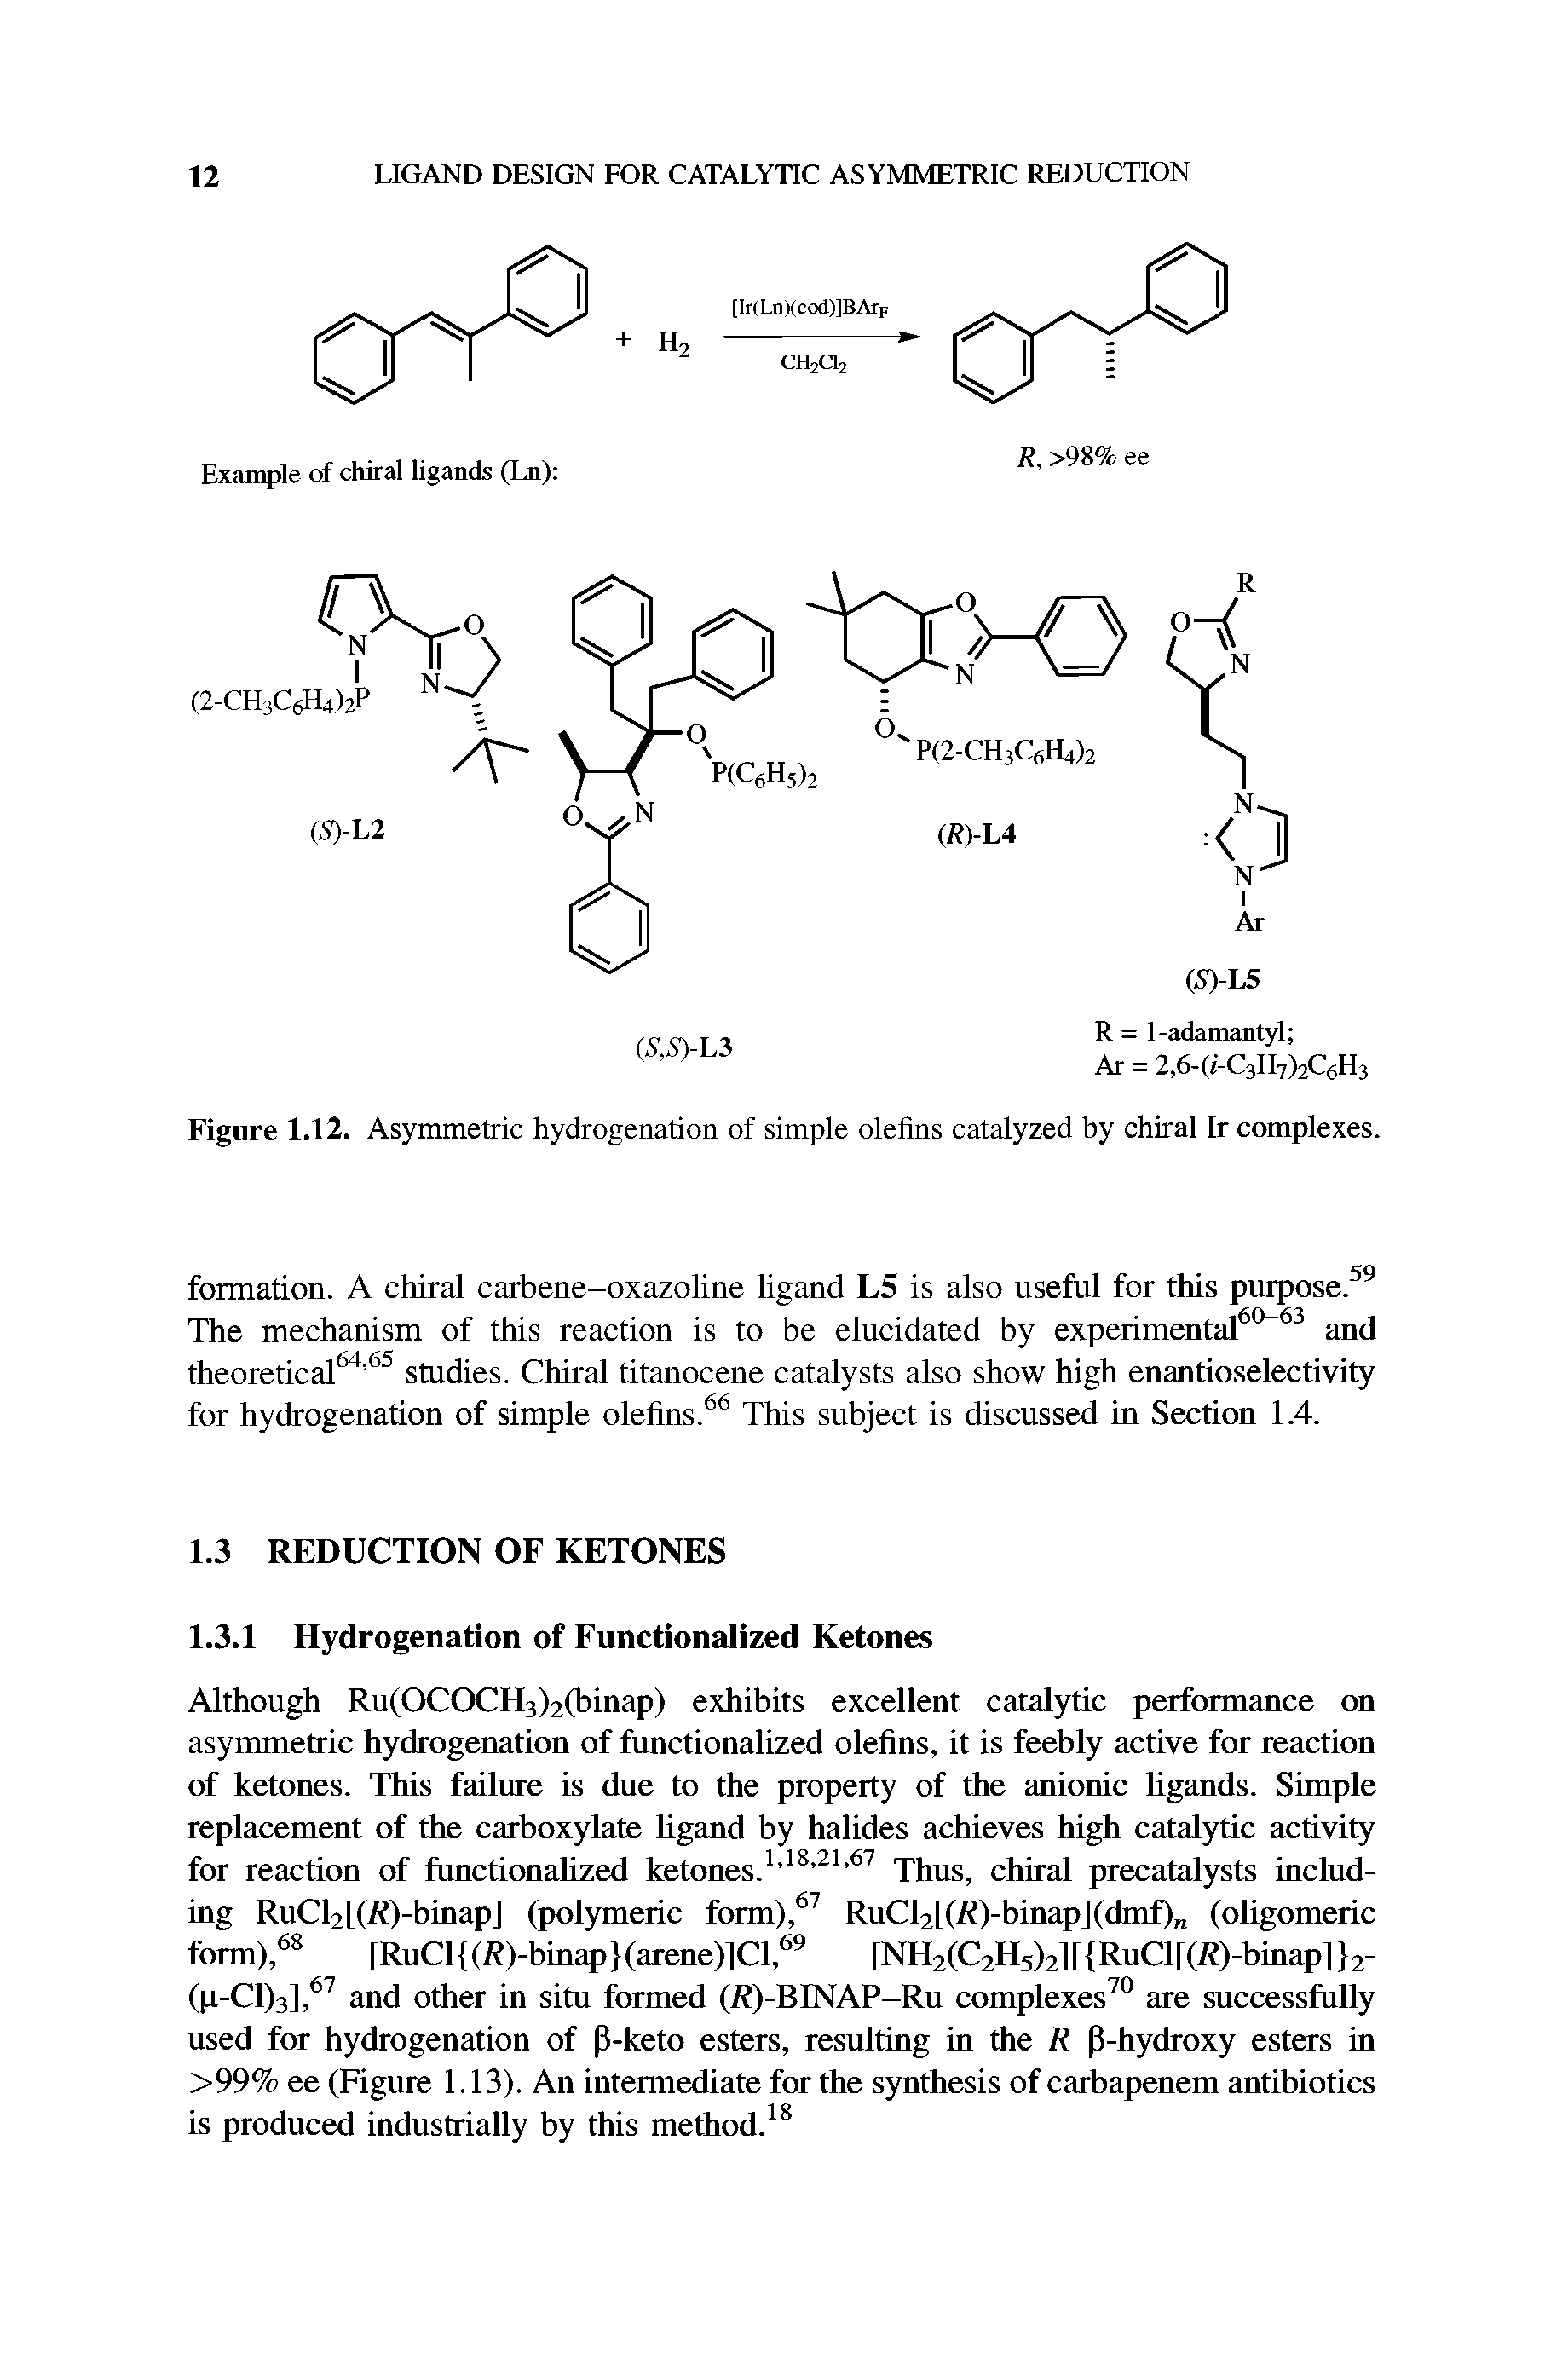 Figure 1.12. Asymmetric hydrogenation of simple olefins catalyzed by chiral Ir complexes.